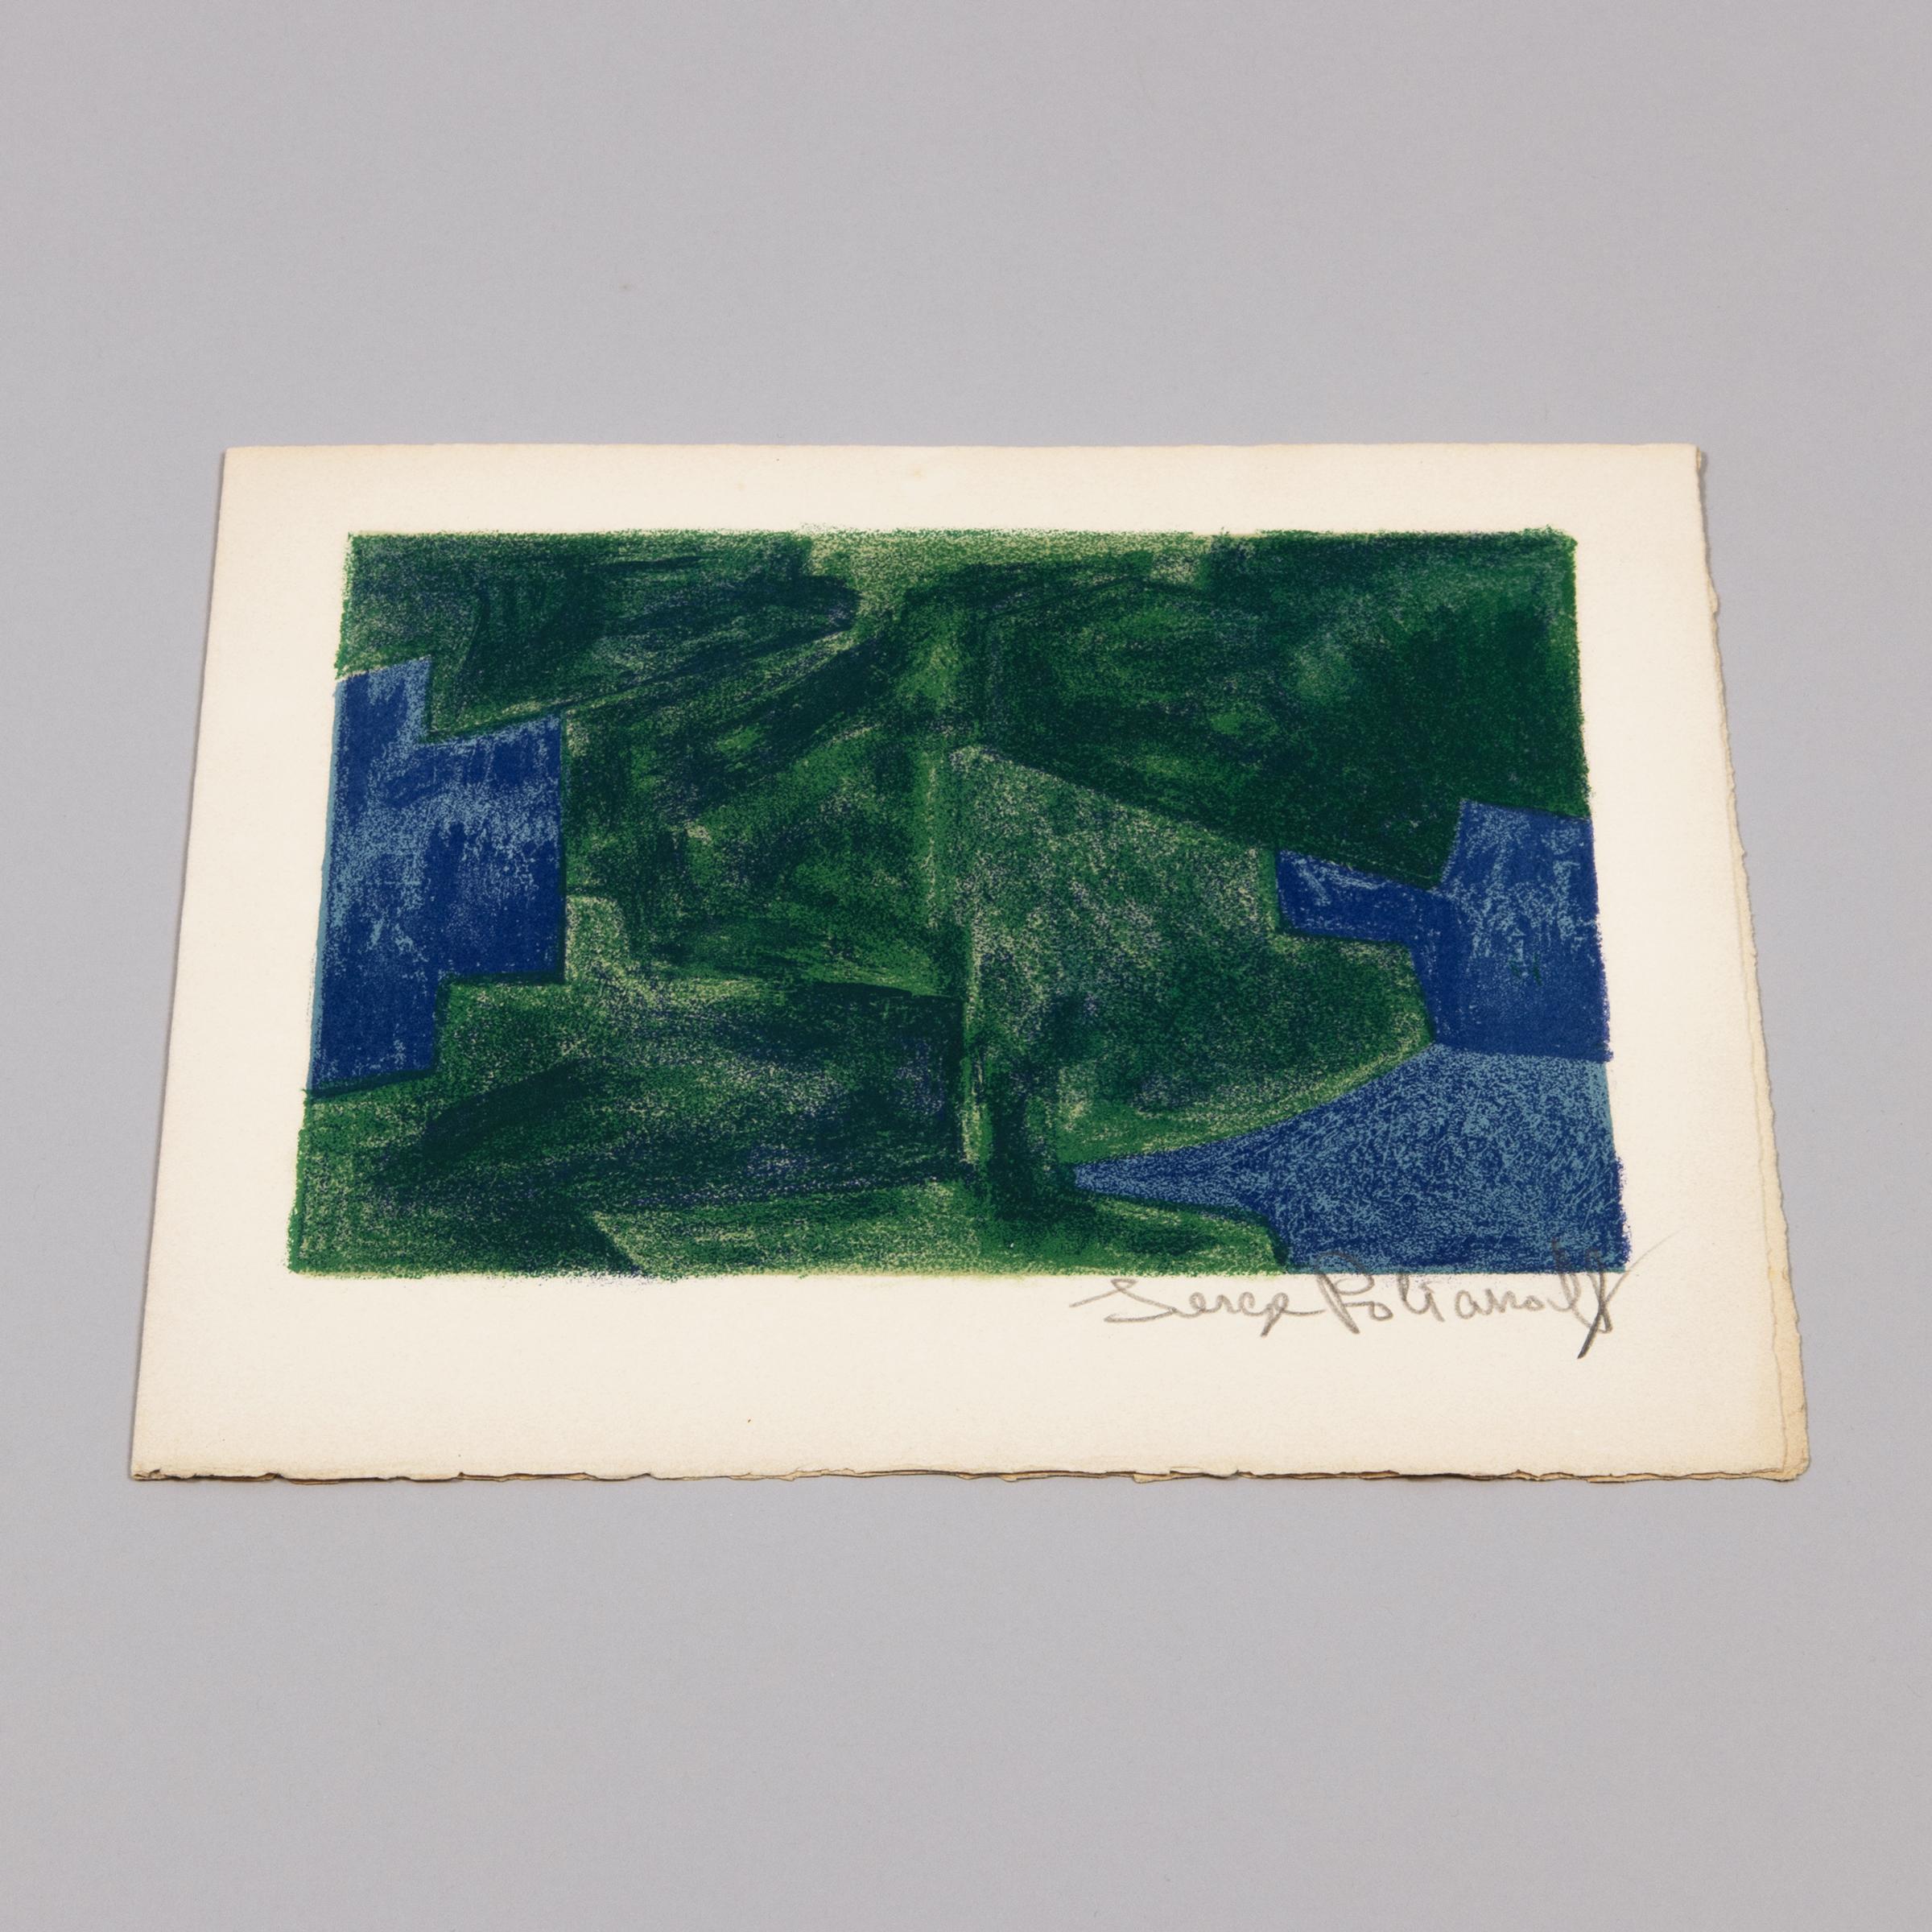 Serge Poliakoff, Composition Bleu et Verte: Signed Lithograph from 1963 For Sale 3